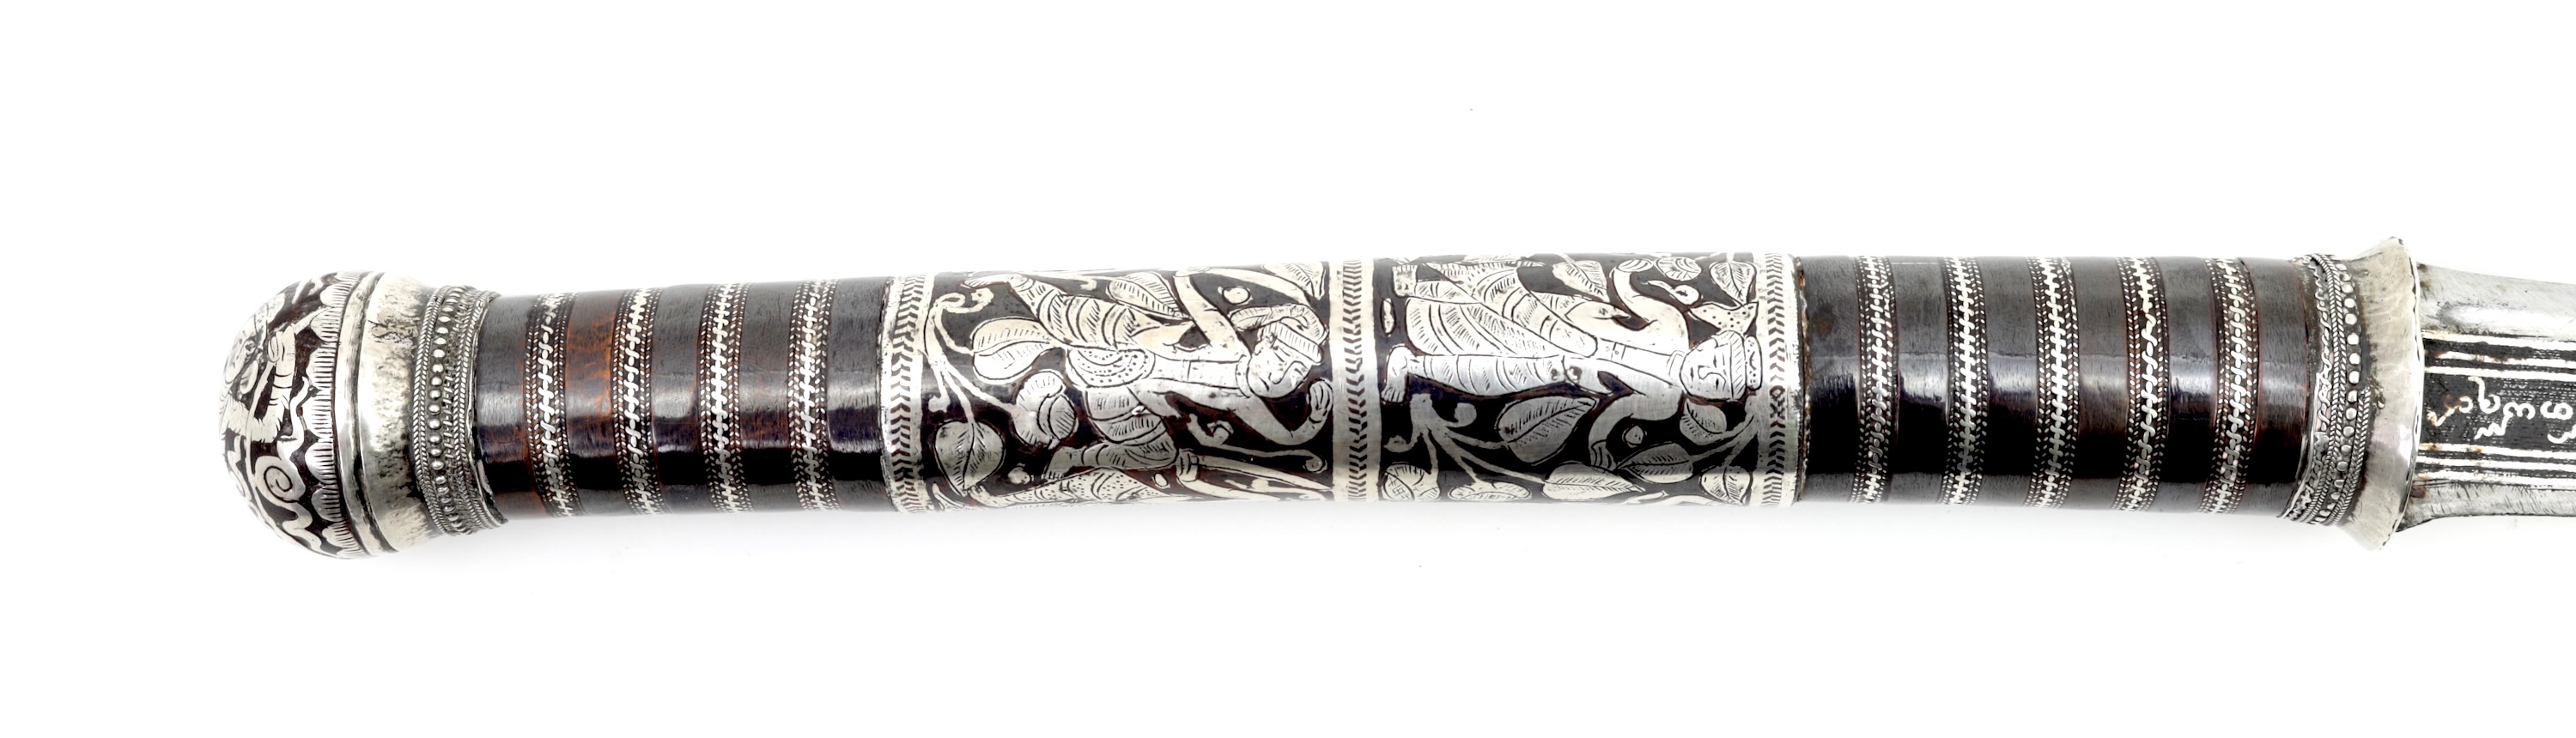 Mindan dha with silver overlaid blade with a story with a forging scene